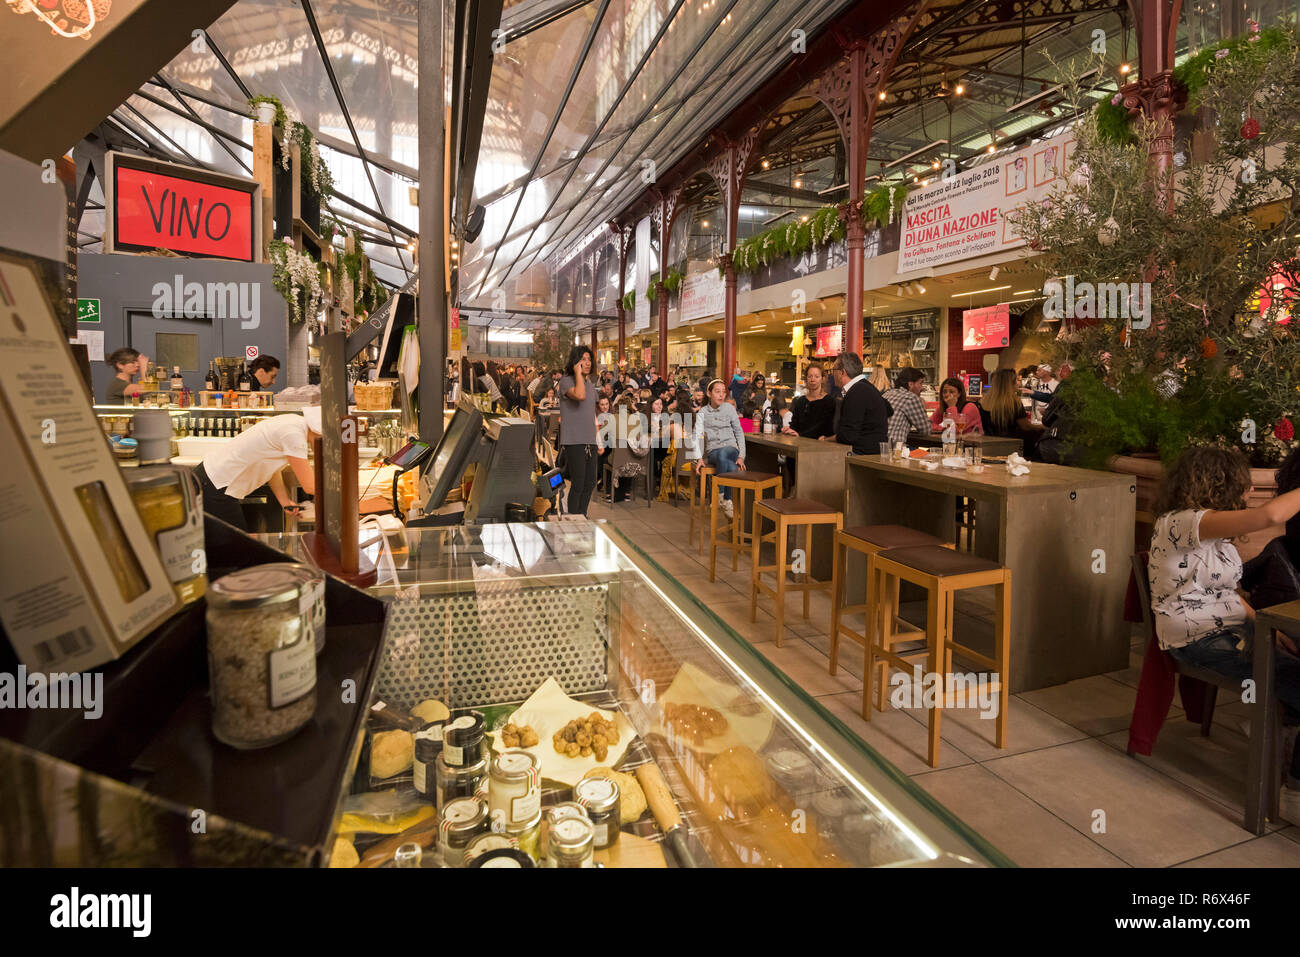 Horizontal portait of people at a food hall in Florence, Italy. Stock Photo